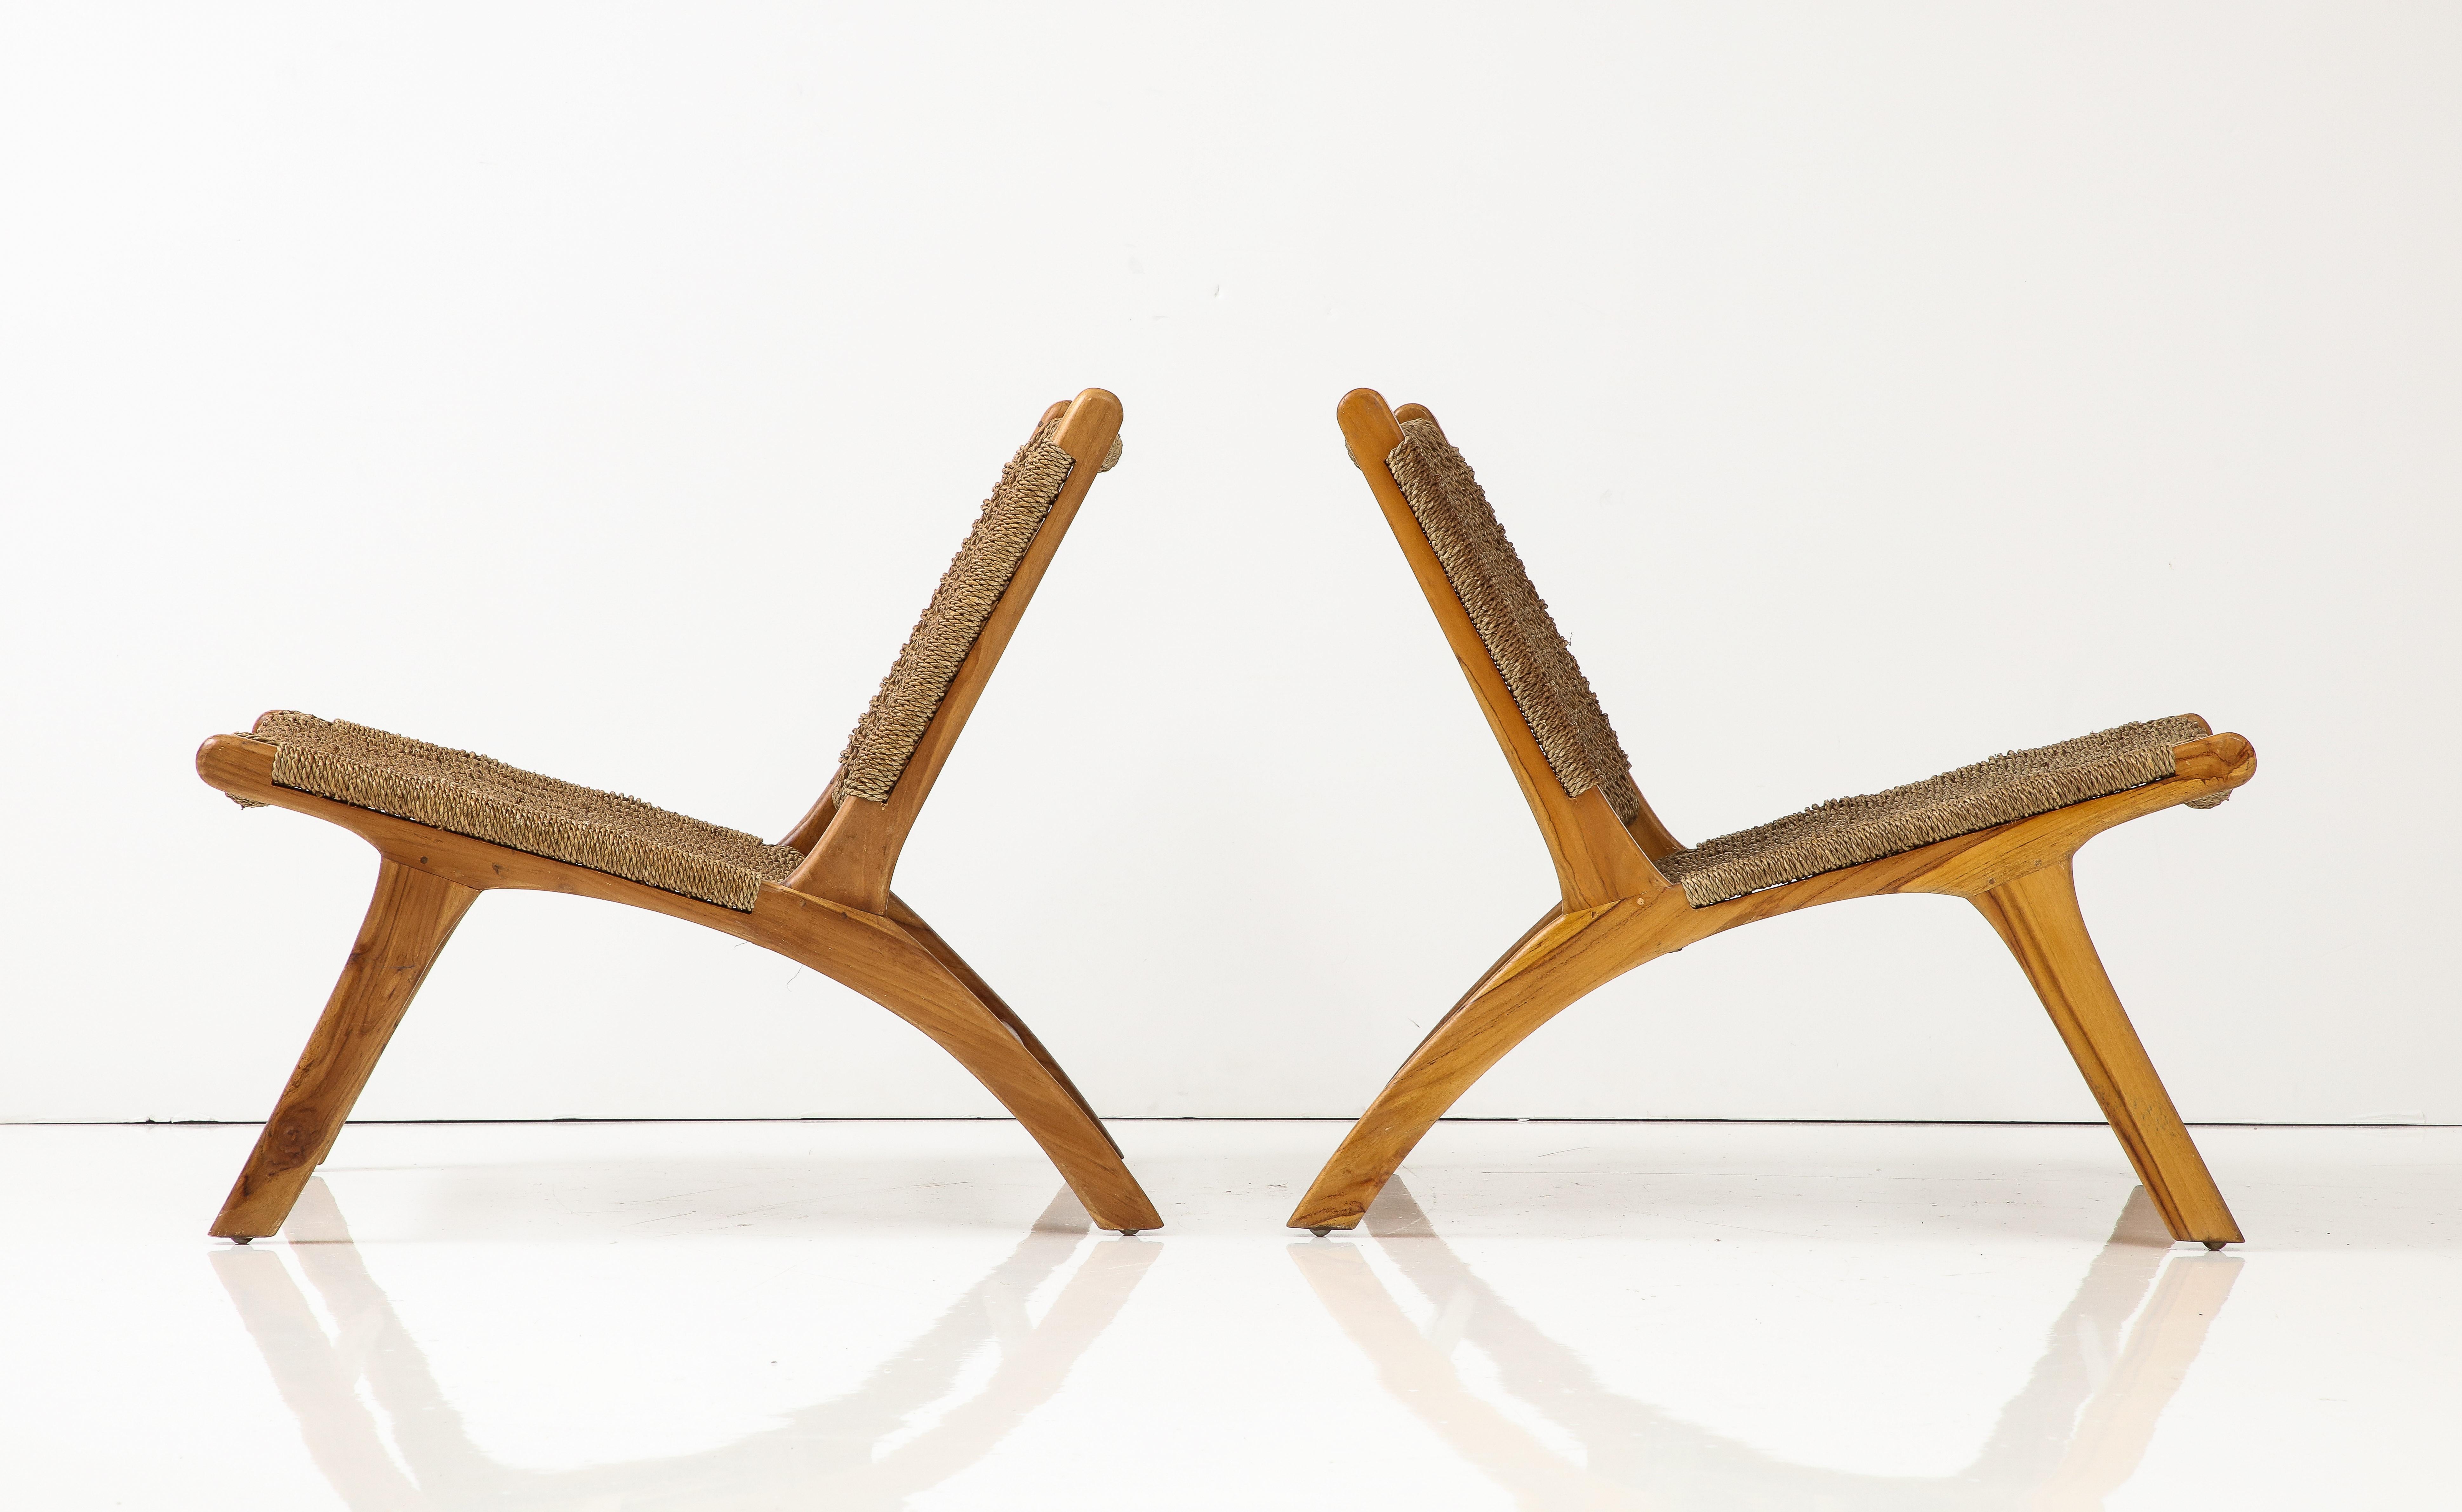 Pair of Wood & Cord Chairs, France, C. 1990s, Signed, Numbered 8